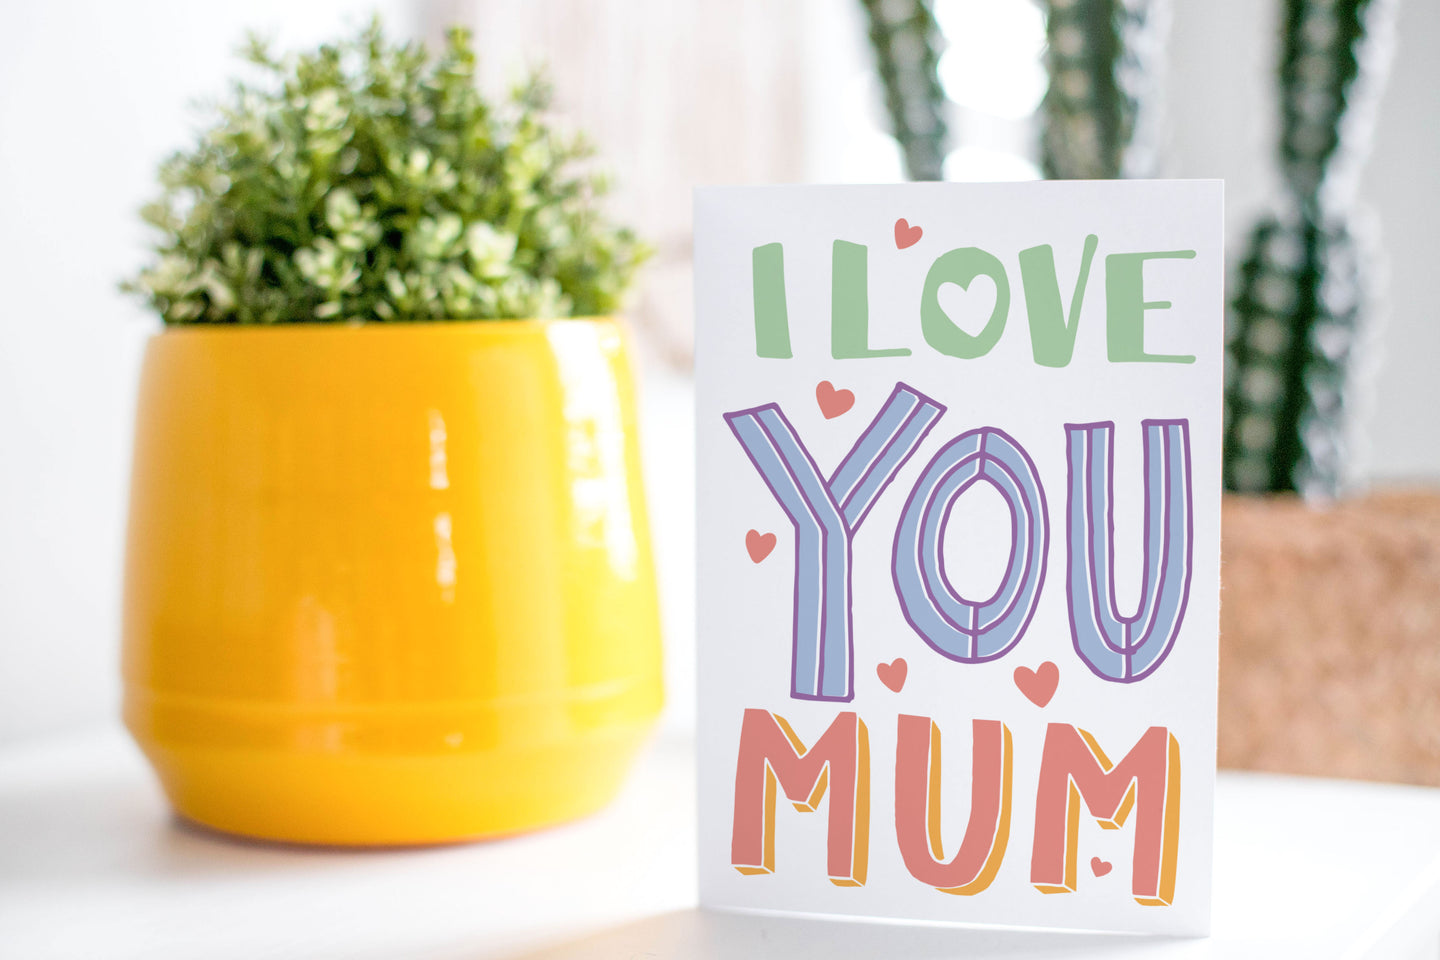 A greeting card is on a table top with a yellow plant pot and a green plant inside. The card features illustrated lettering reading “I love you Mum” with small hearts around the words.